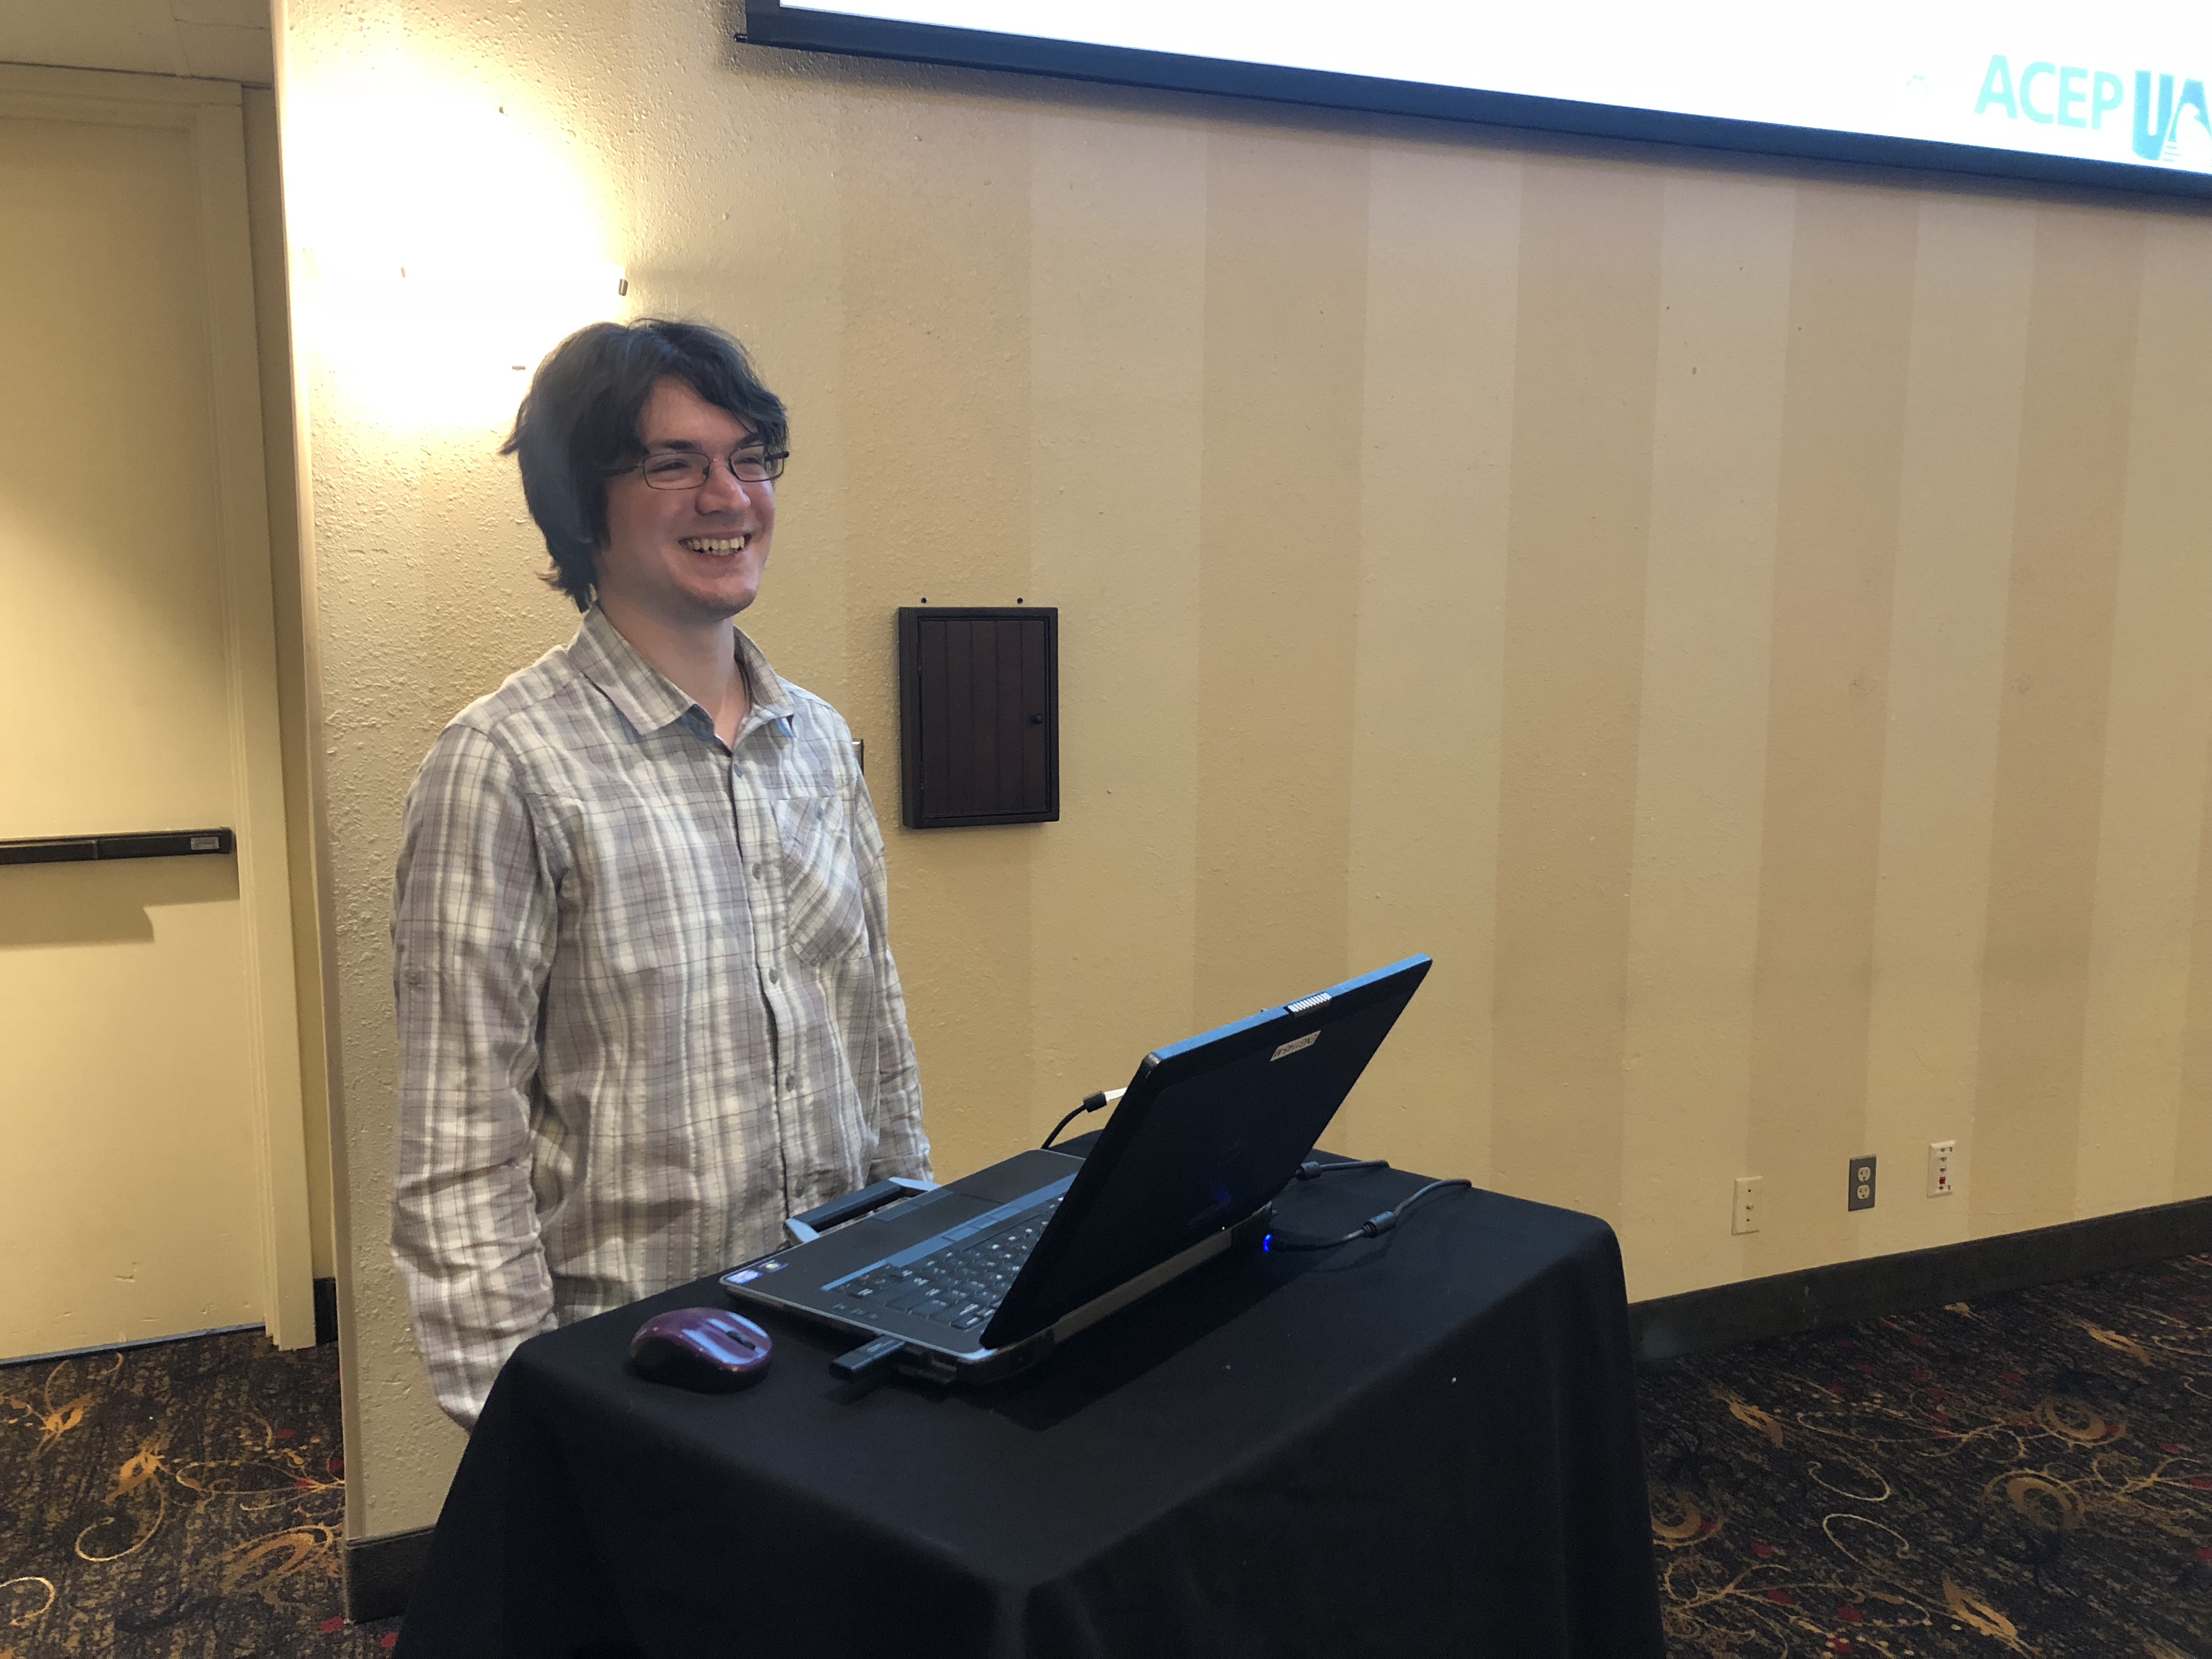 ACEP Graduate Student Presents to American Society of Civil Engineers